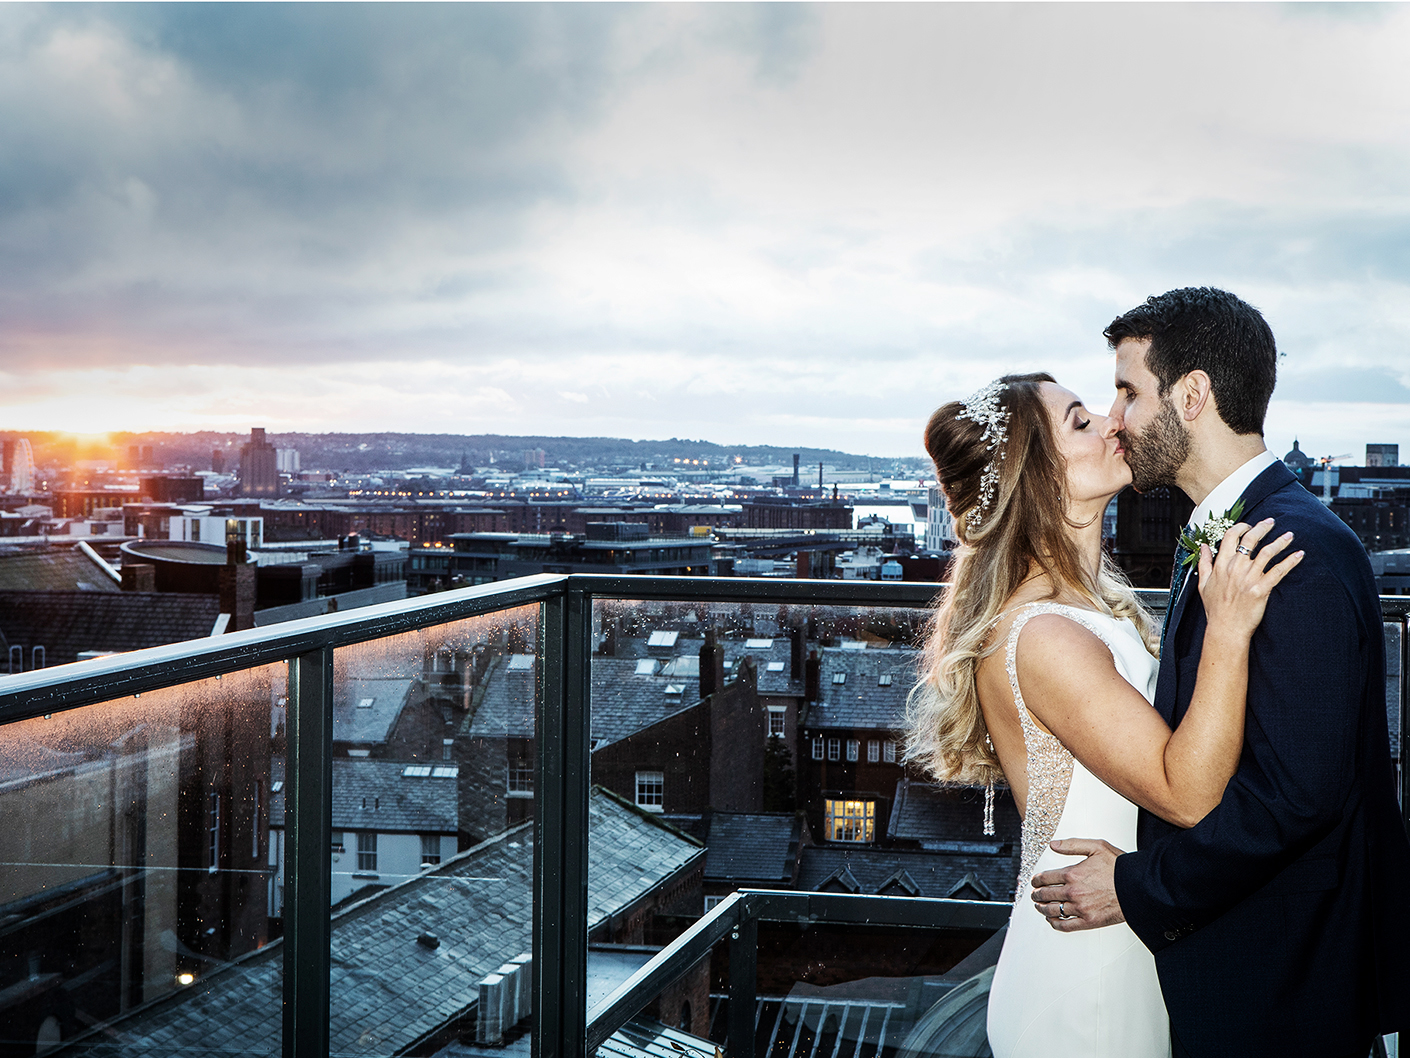 wedding-photography-of-rhe-bride-and-groom-at-the-hope-street-hotel-liverpool